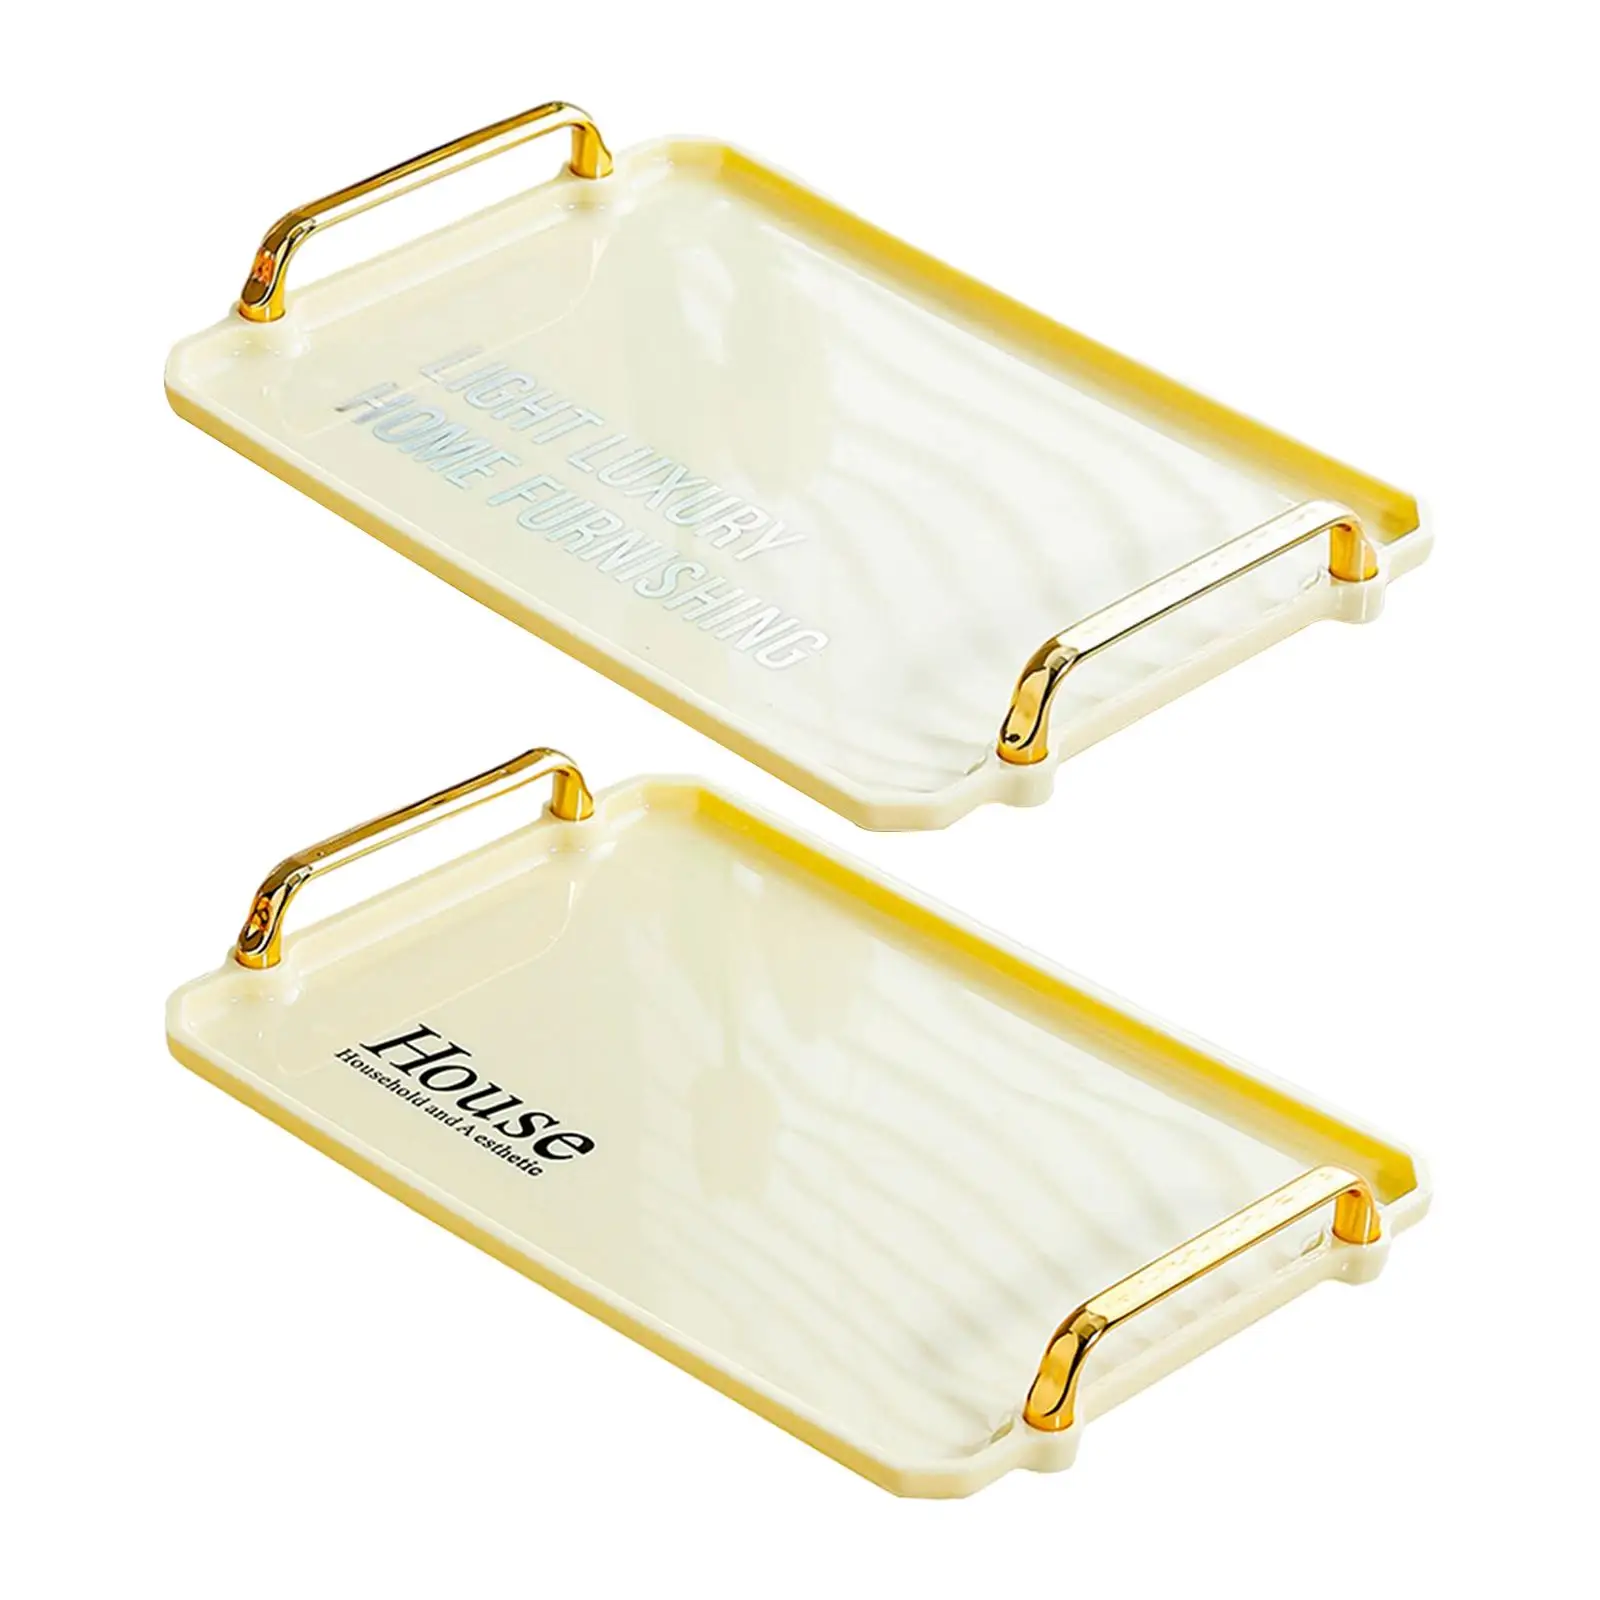 Serving Tray with Gold Handles Storage Multipurpose Practical Rectangle Tray Modern for Drinks Bedroom Home Party